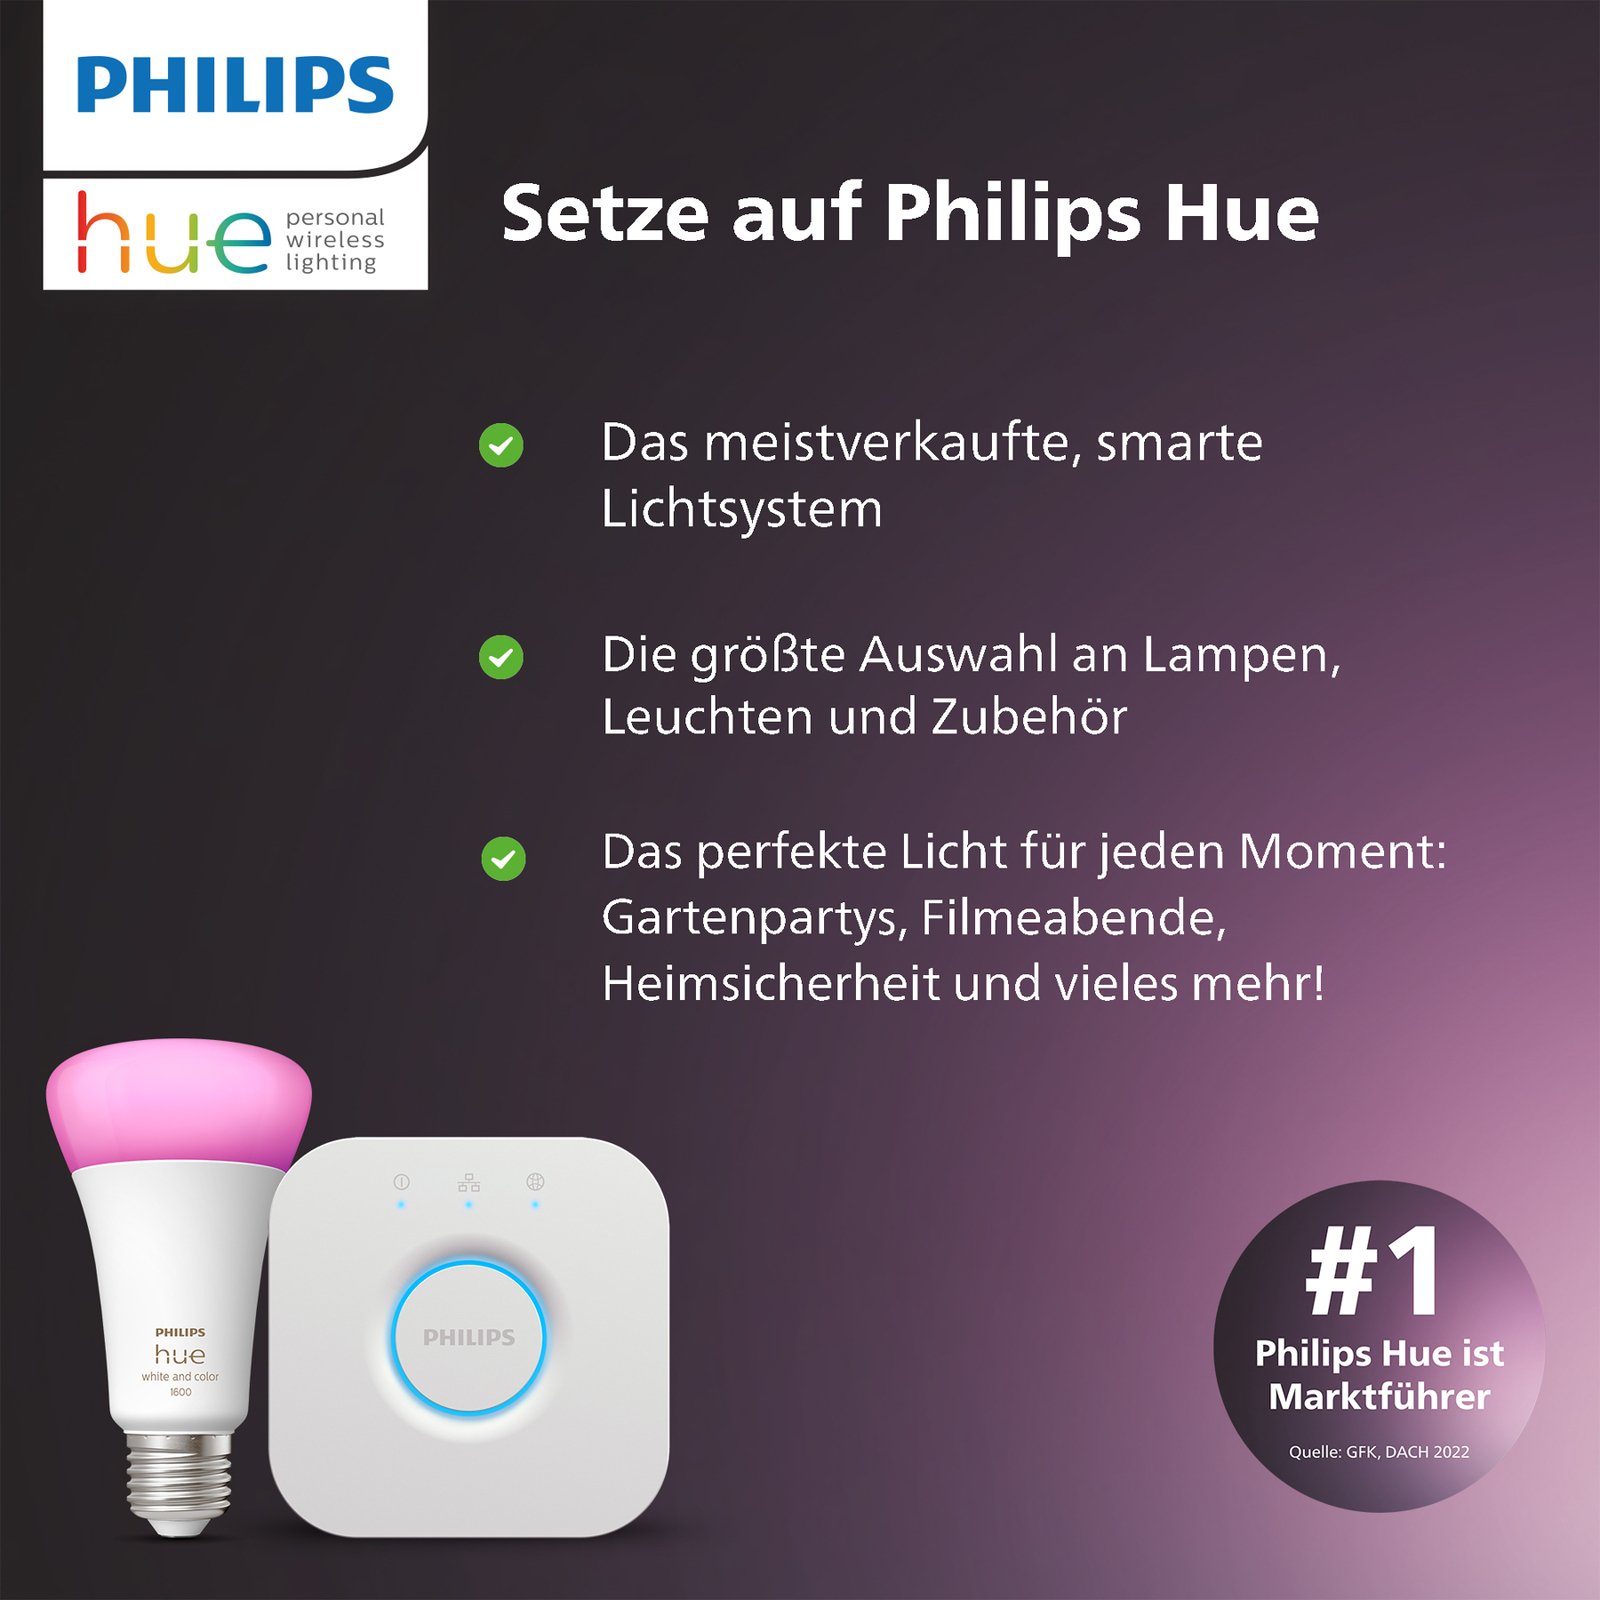 Philips Hue White&Color Ambiance E27 11W 1055lm 2er